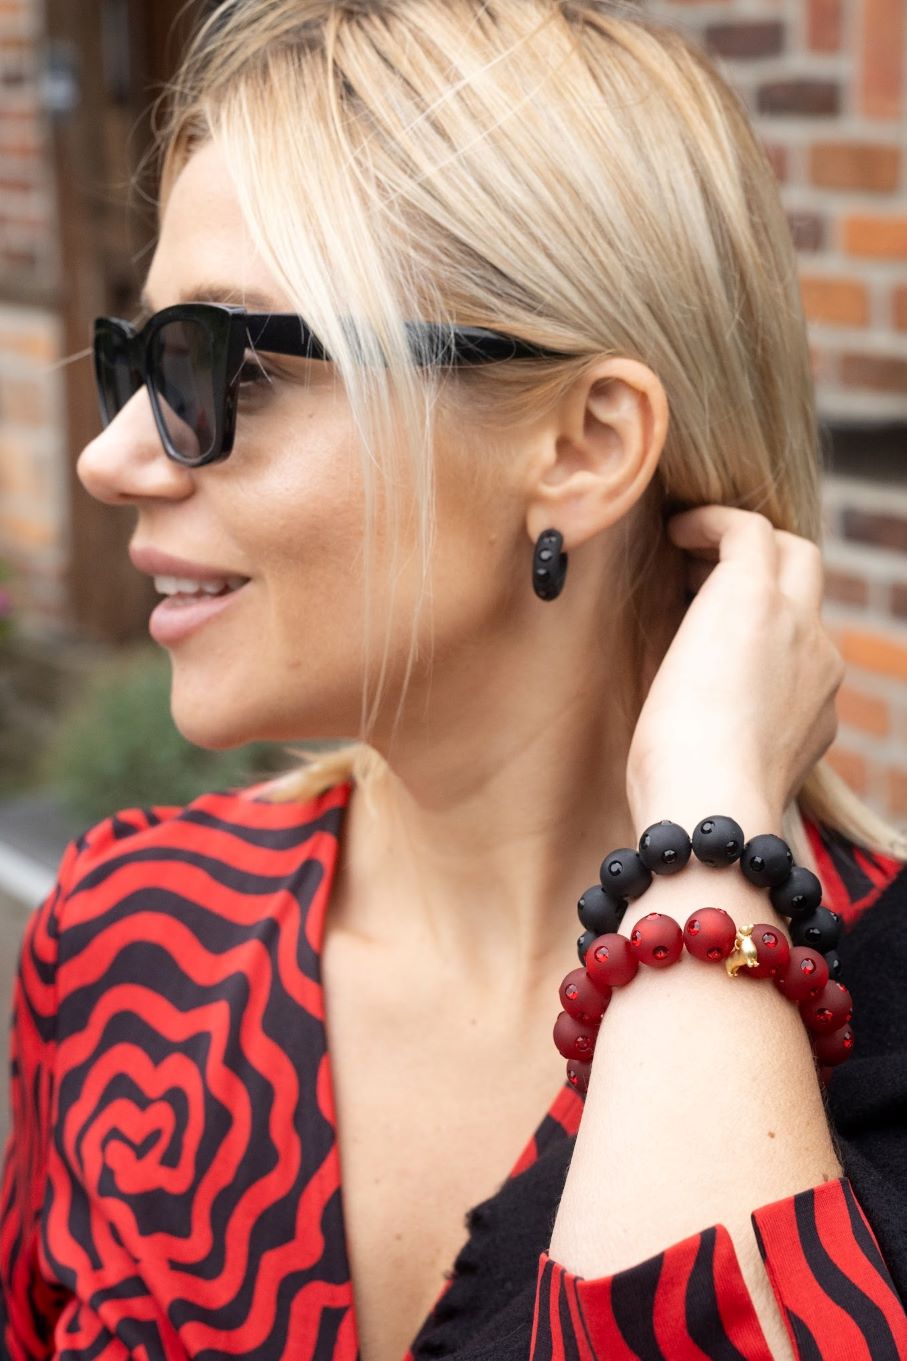 Frau mit Coloristers Ohrringen und Perlenarmband in dunklem rot mit Kristallen. Women with Coloristers earrings and pearl bracelet in dark red with crystals. 